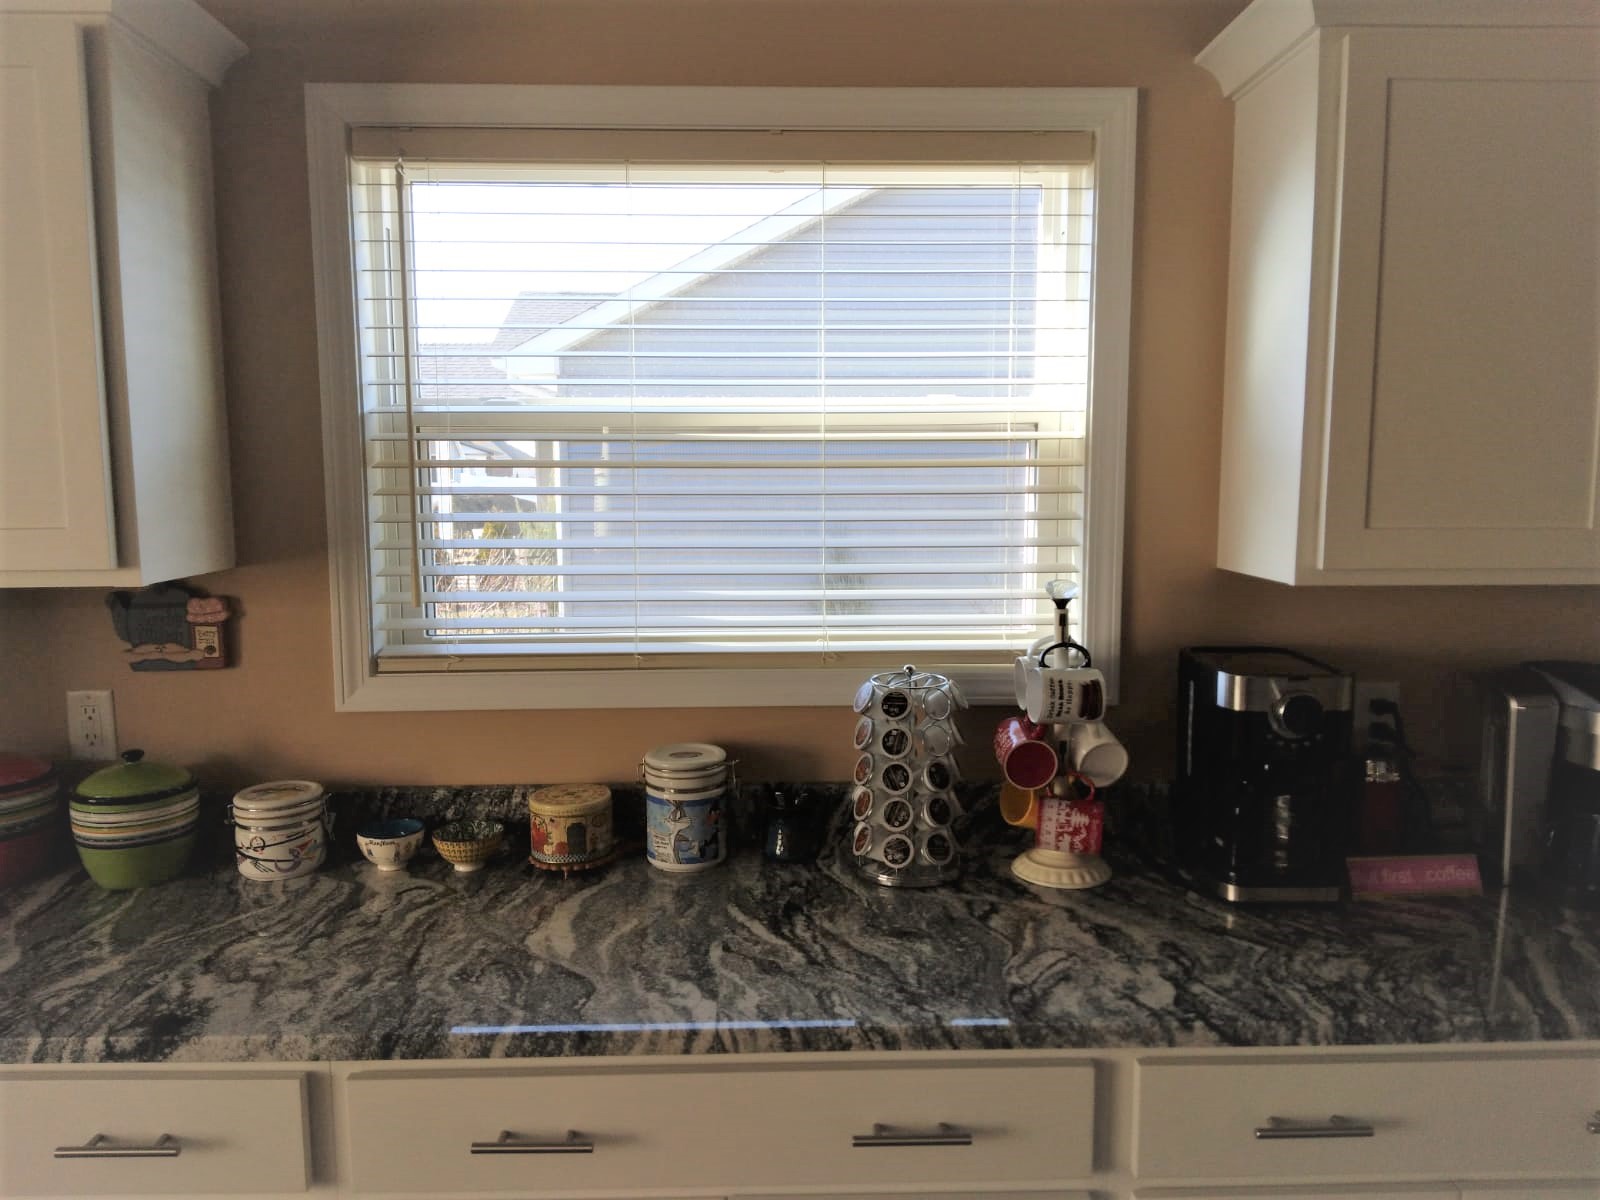 These faux wood blinds in this Springfield Illinois kitchen filter the perfect amount of light and add just the right amount of style. They are both a classic and modern window covering.  BudgetBlinds  Blinds  FauxWoodBlinds  WindowCoverings  SpringfieldIllinois  Springfield